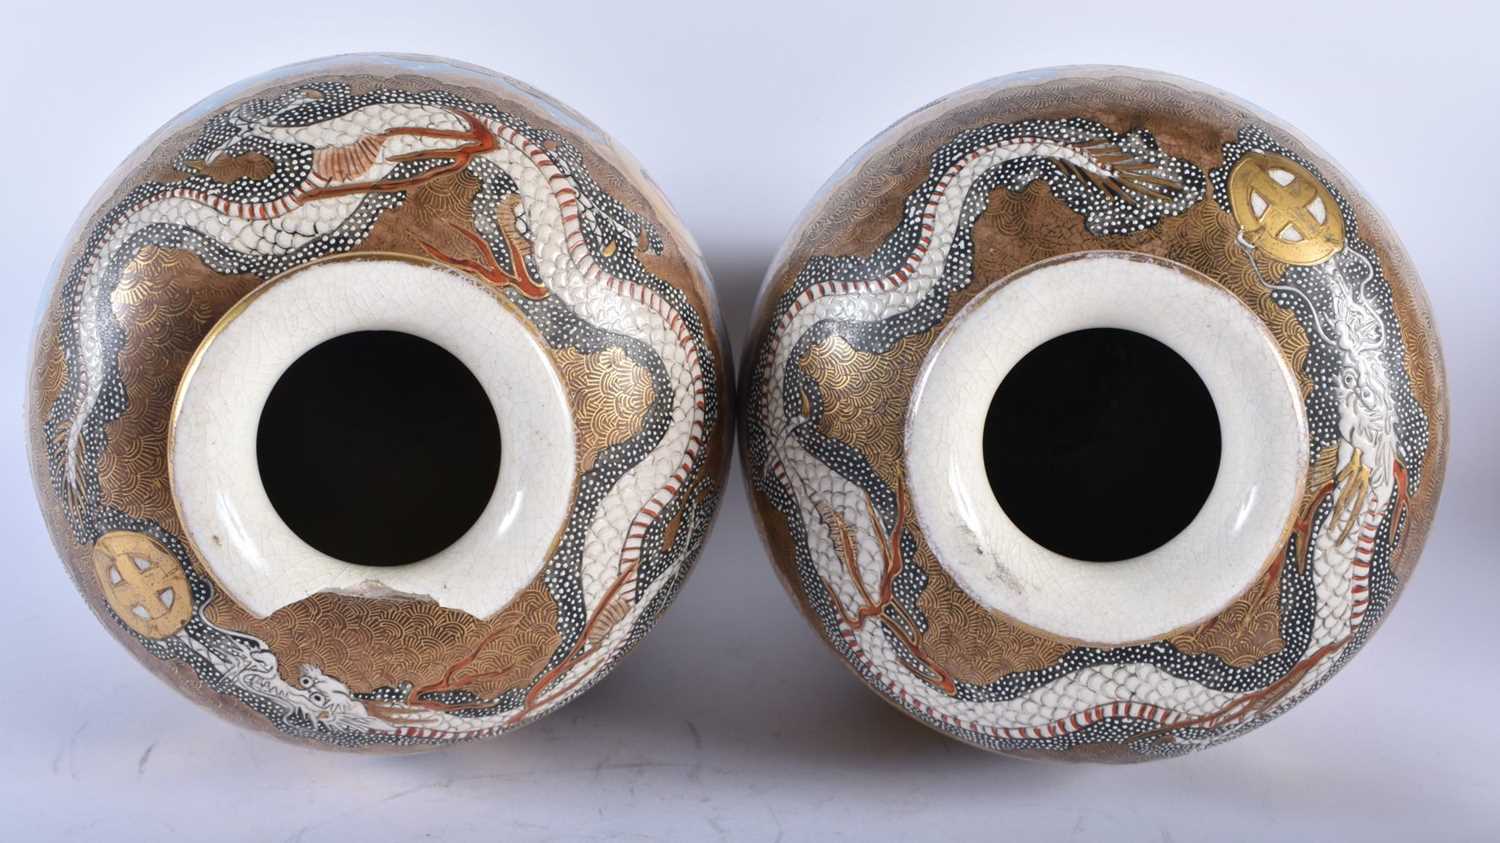 A LARGE PAIR OF 19TH CENTURY JAPANESE MEIJI PERIOD SATSUMA VASES painted with immortals. 30cm x 14 - Image 4 of 5